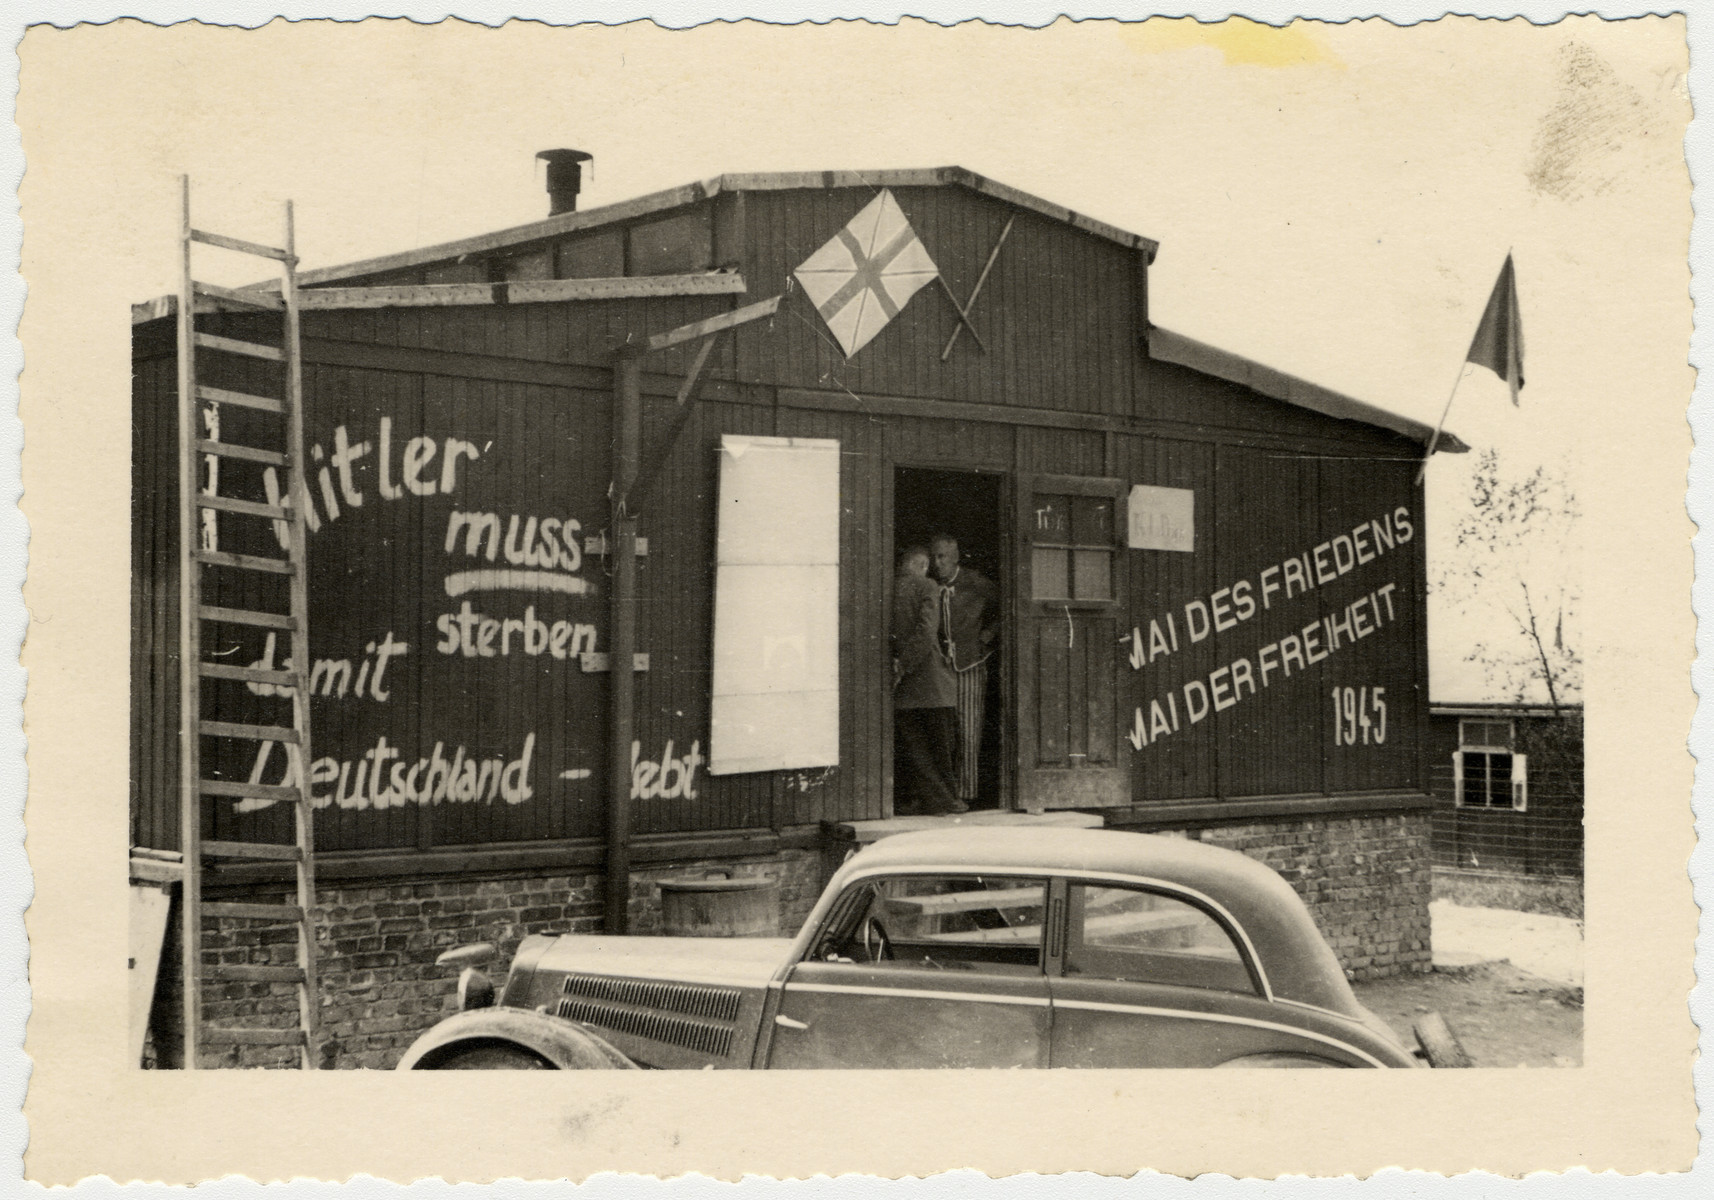 Two men stand in a doorway of the barn in Buchenwald.  

On the barn is painted, "Hitler muss sterben damit Deutschland -- lebt / Mai des Friedens/ Mai der Freiheit 1945," [Hitler must die so that Germany lives / May of Peace/ May of Freedom 1945].